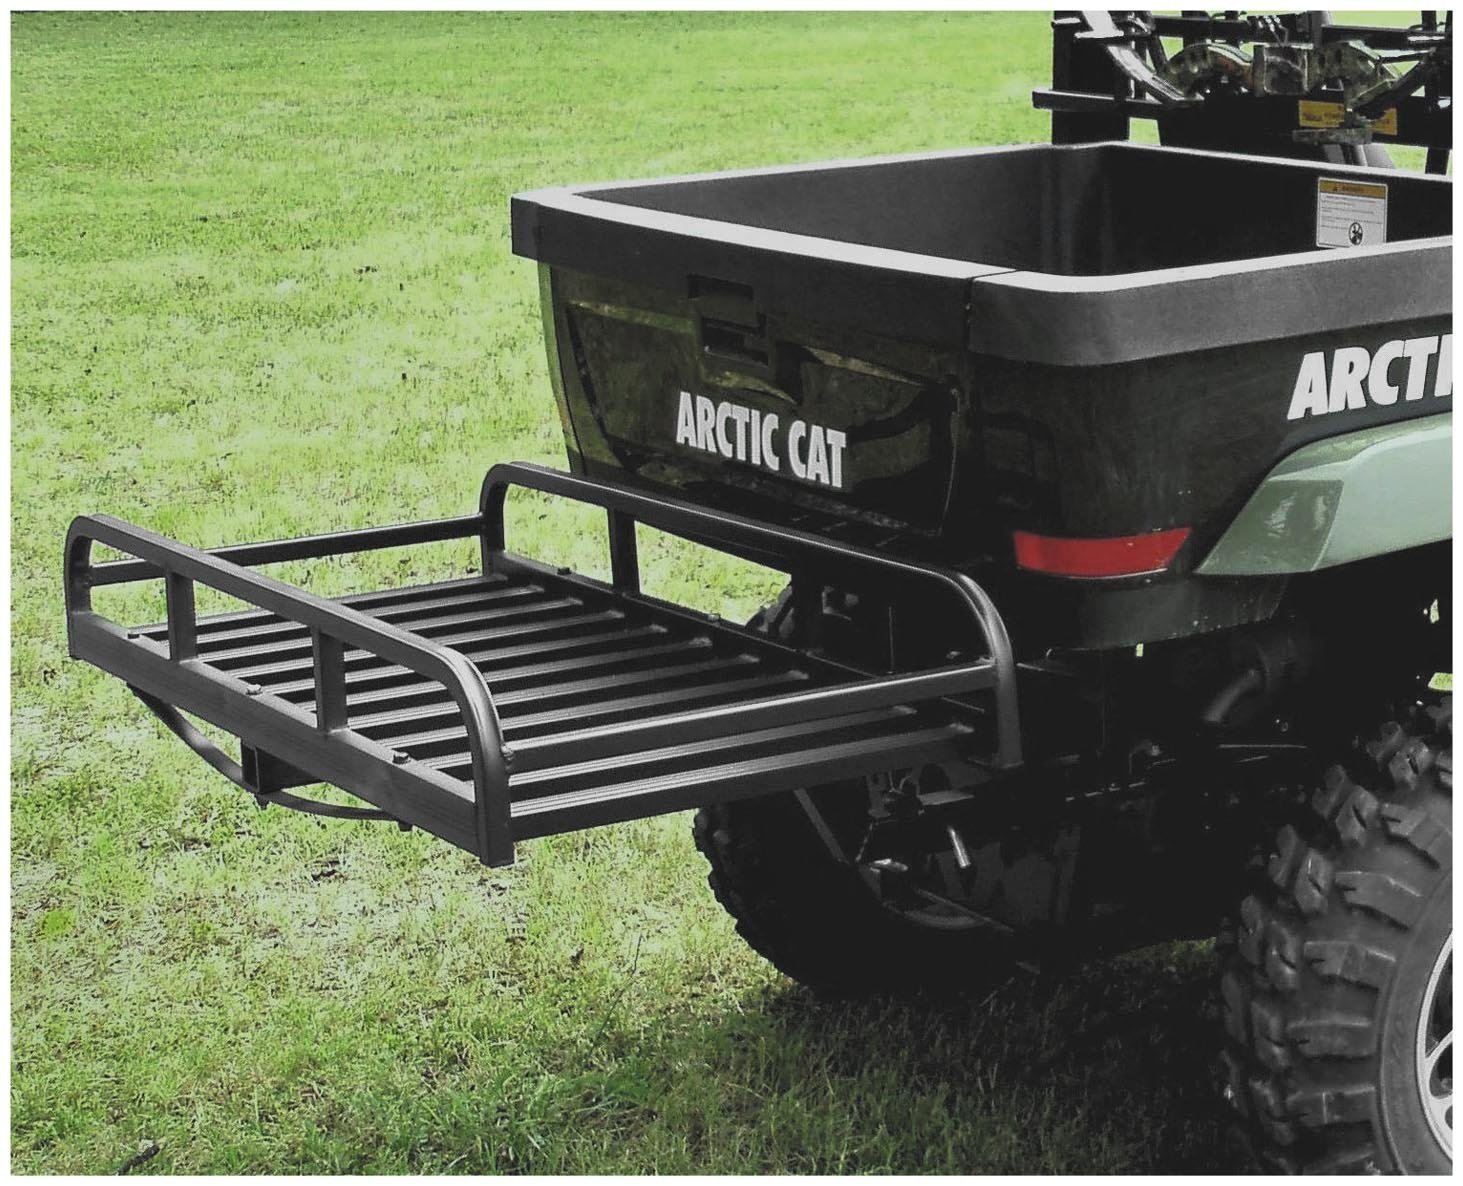 More information about "Great Day Utility Vehicle Hitch Stabilizer"